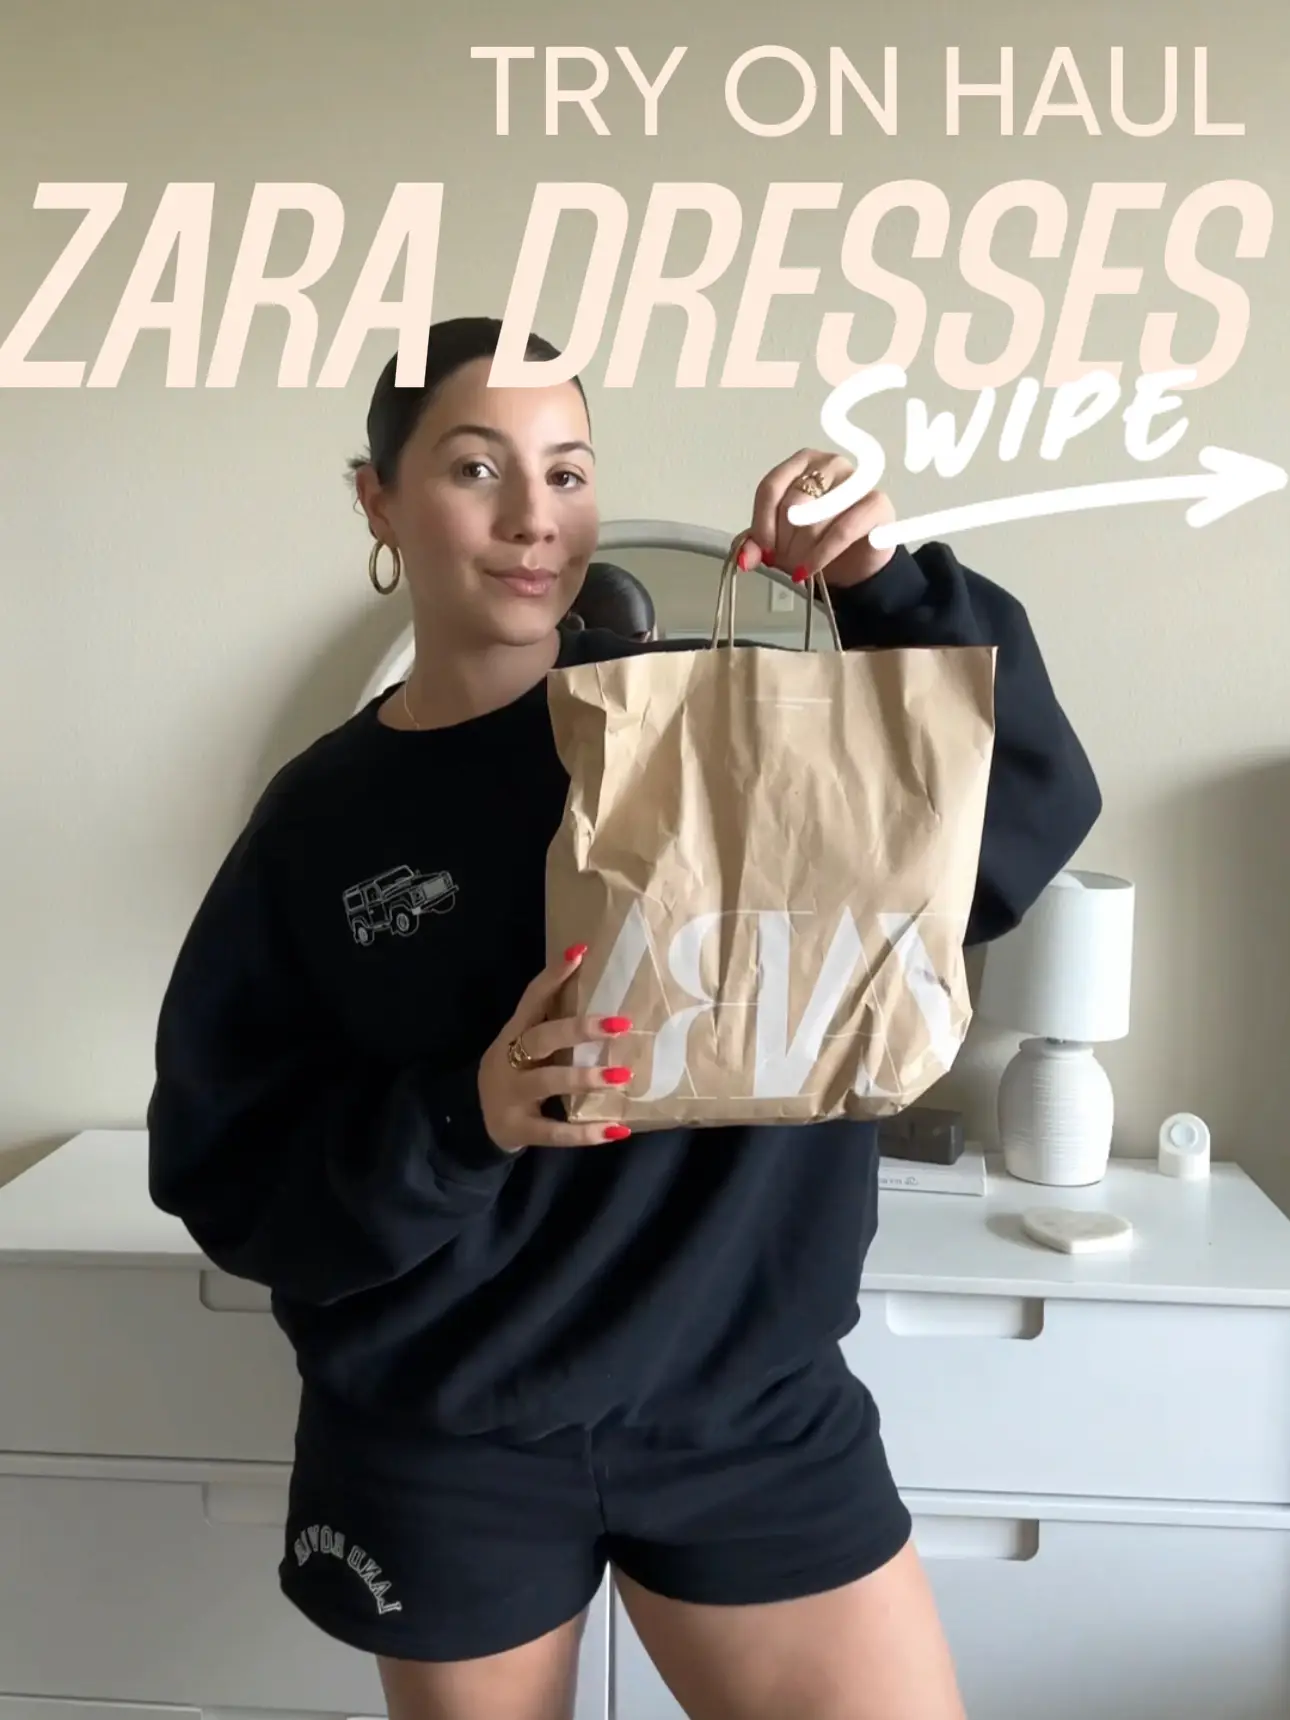 zara dress try on haul, Gallery posted by Valerie Escobar